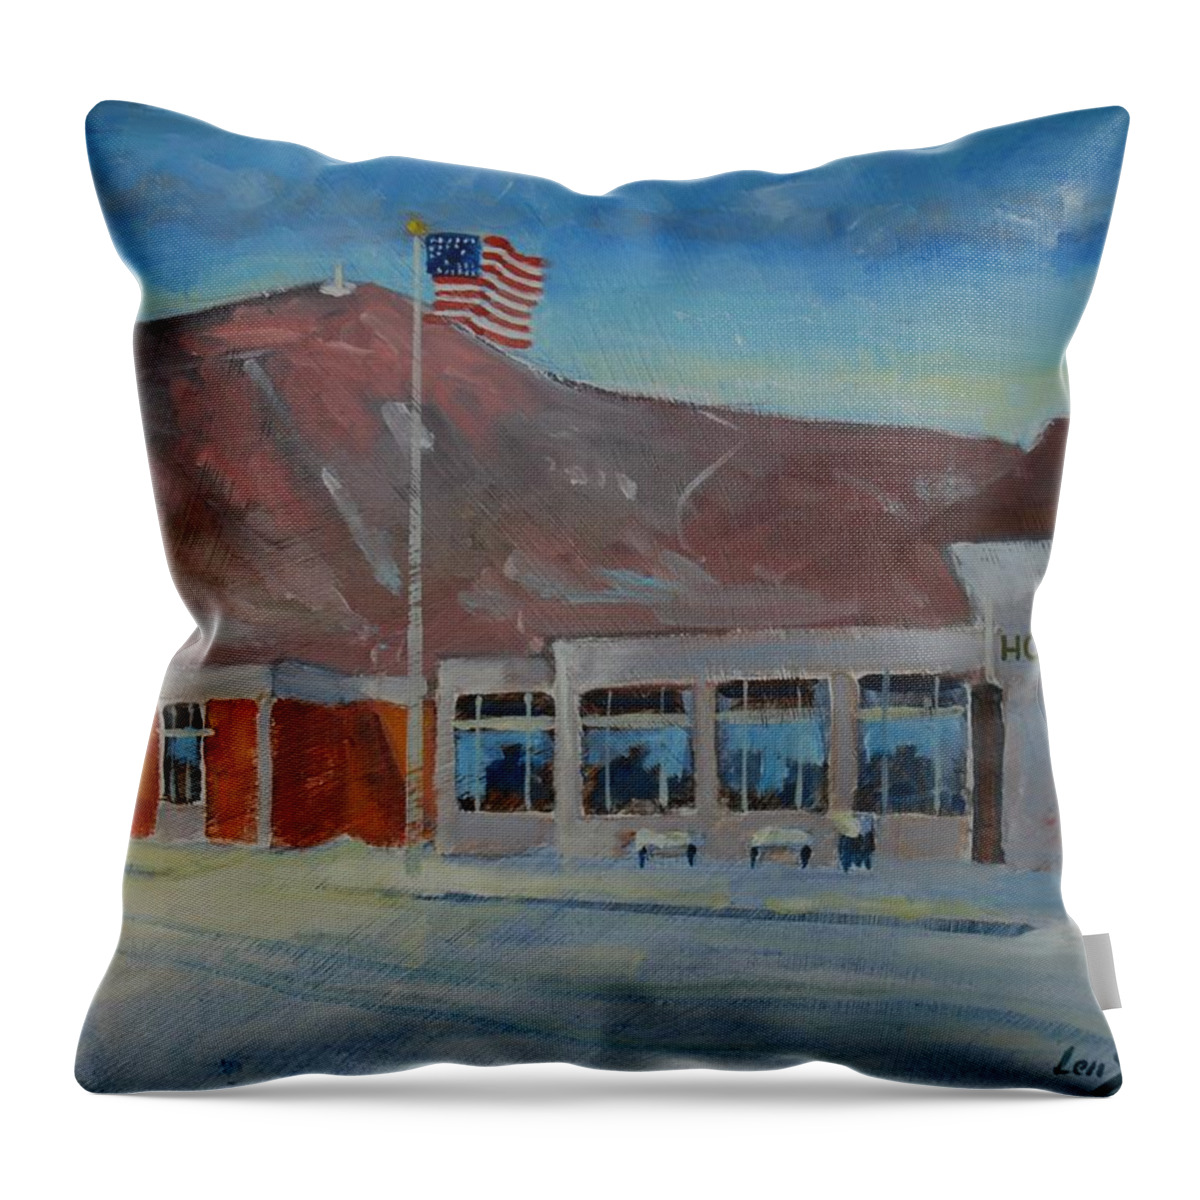 Hoosac Valley High School. Greylock Mountain Throw Pillow featuring the painting Infinite Horizons by Len Stomski